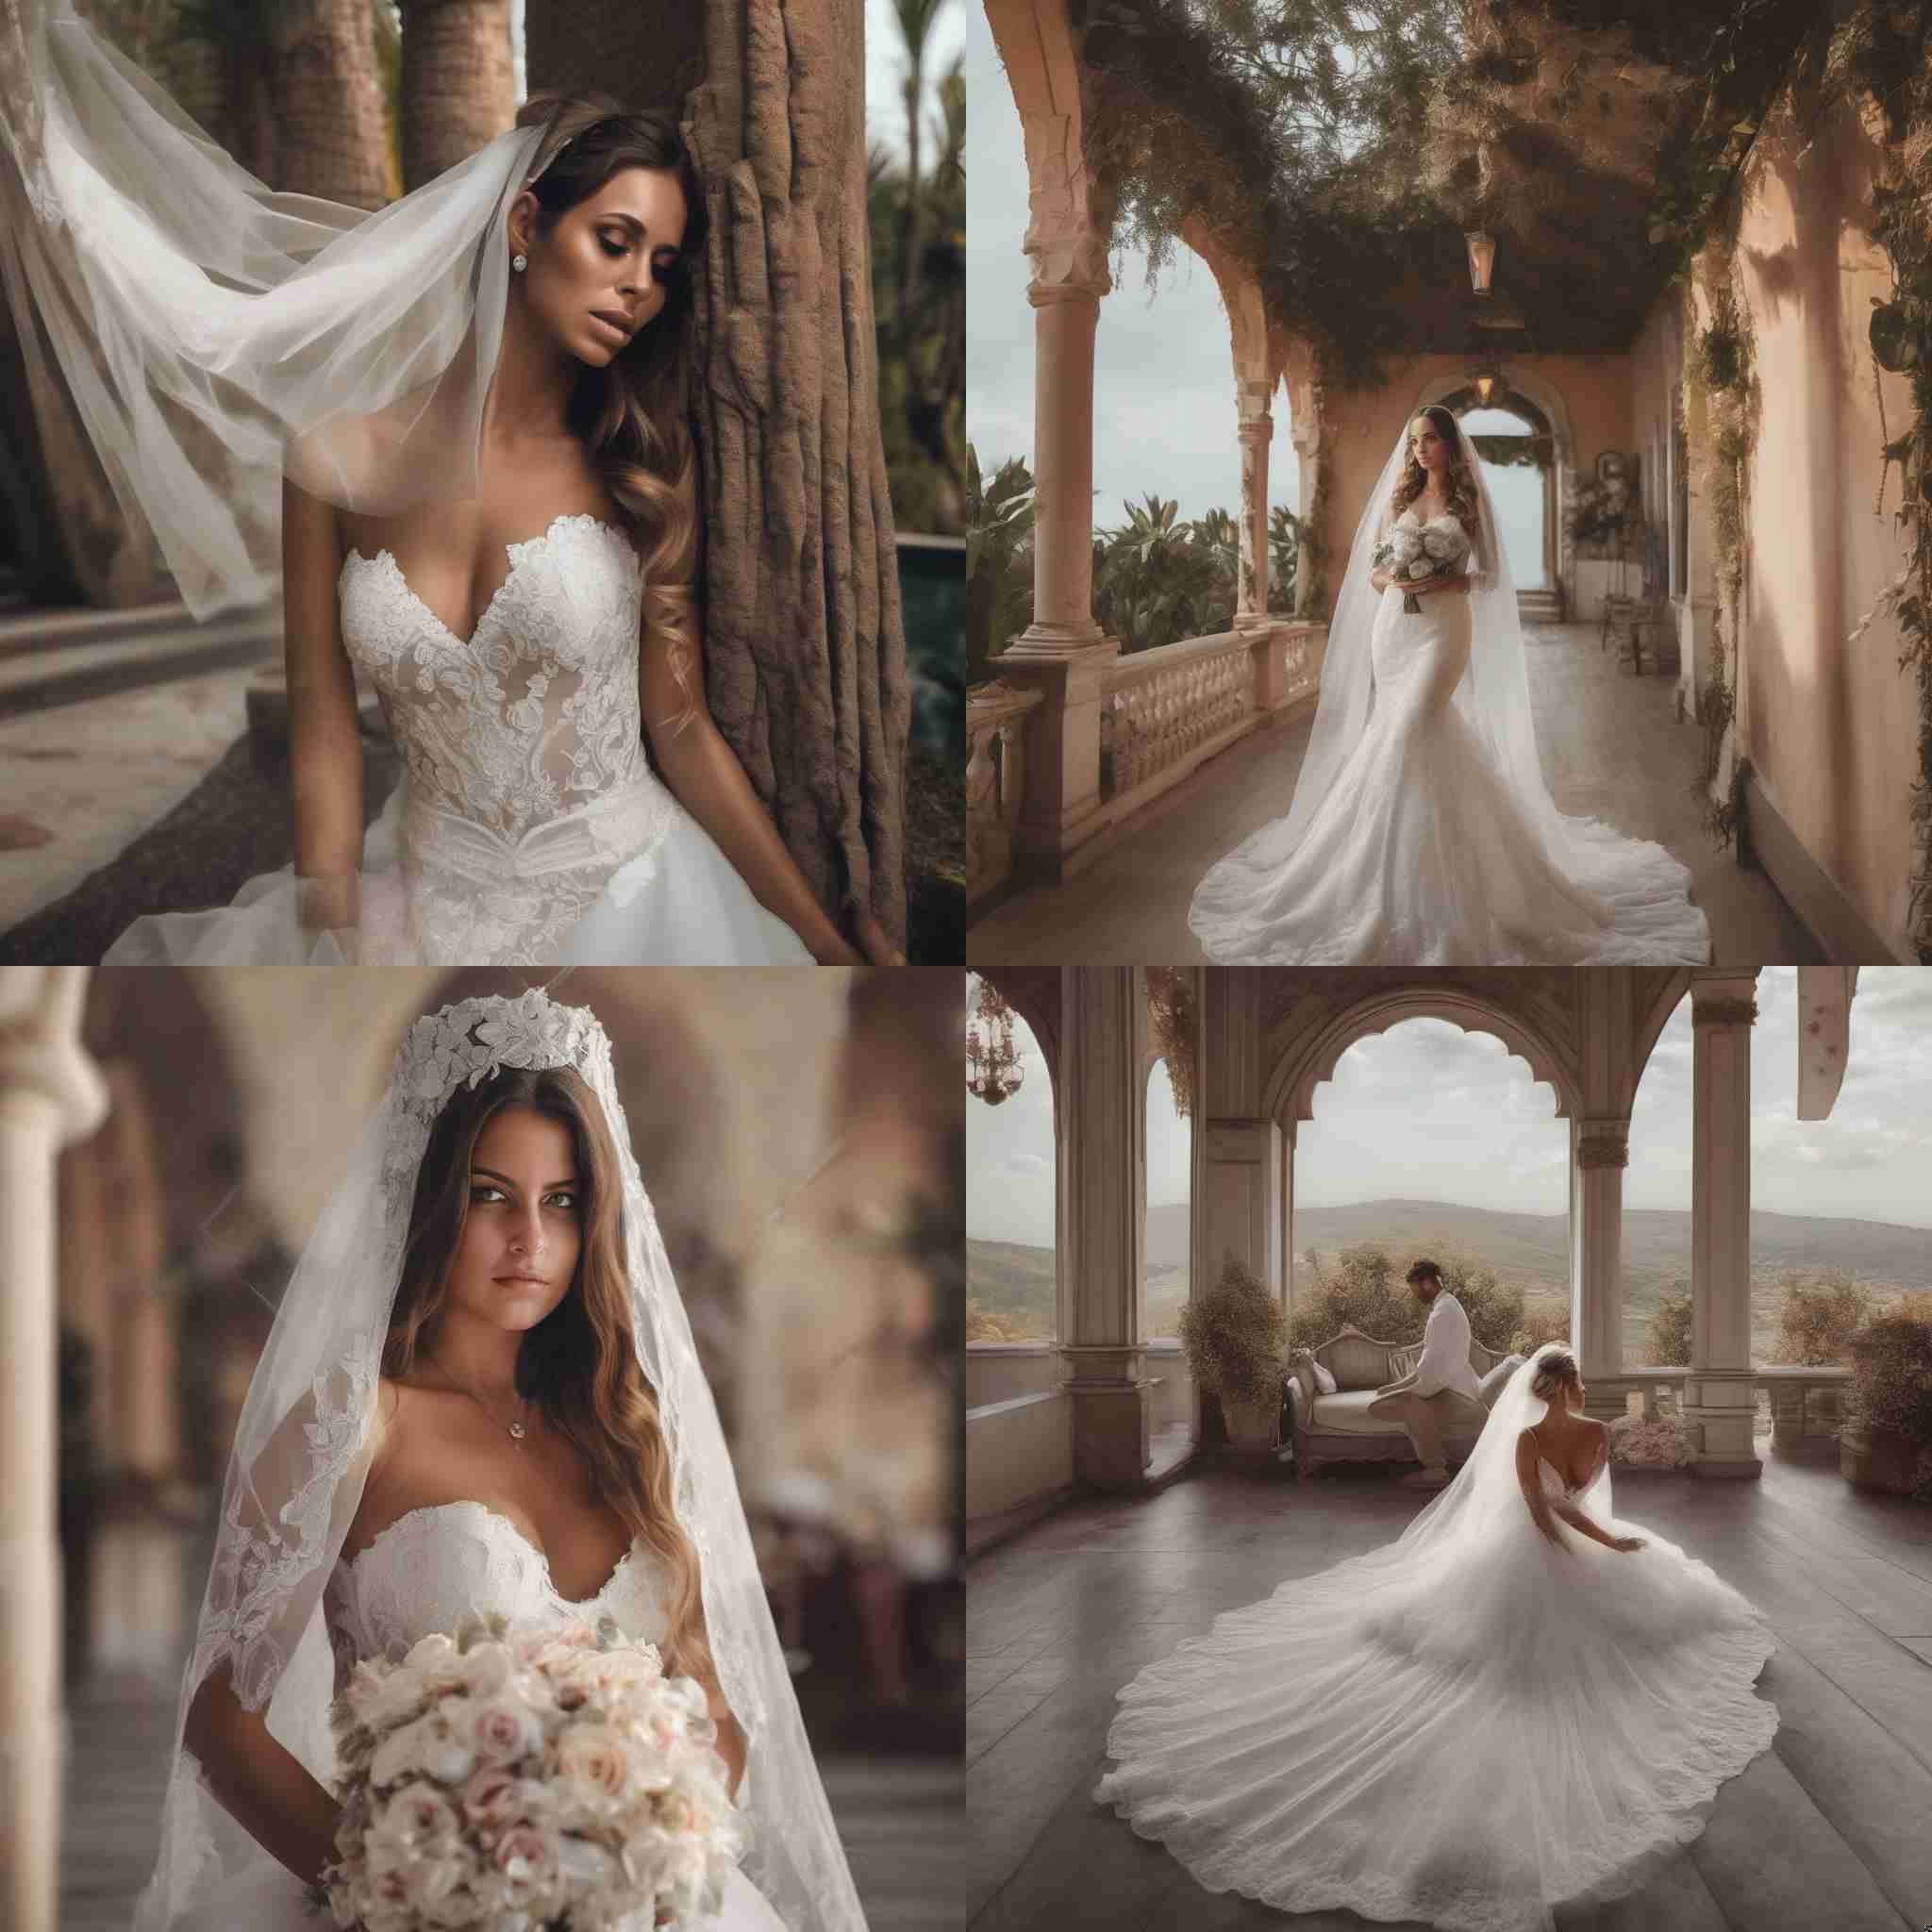 A bride during the honeymoon